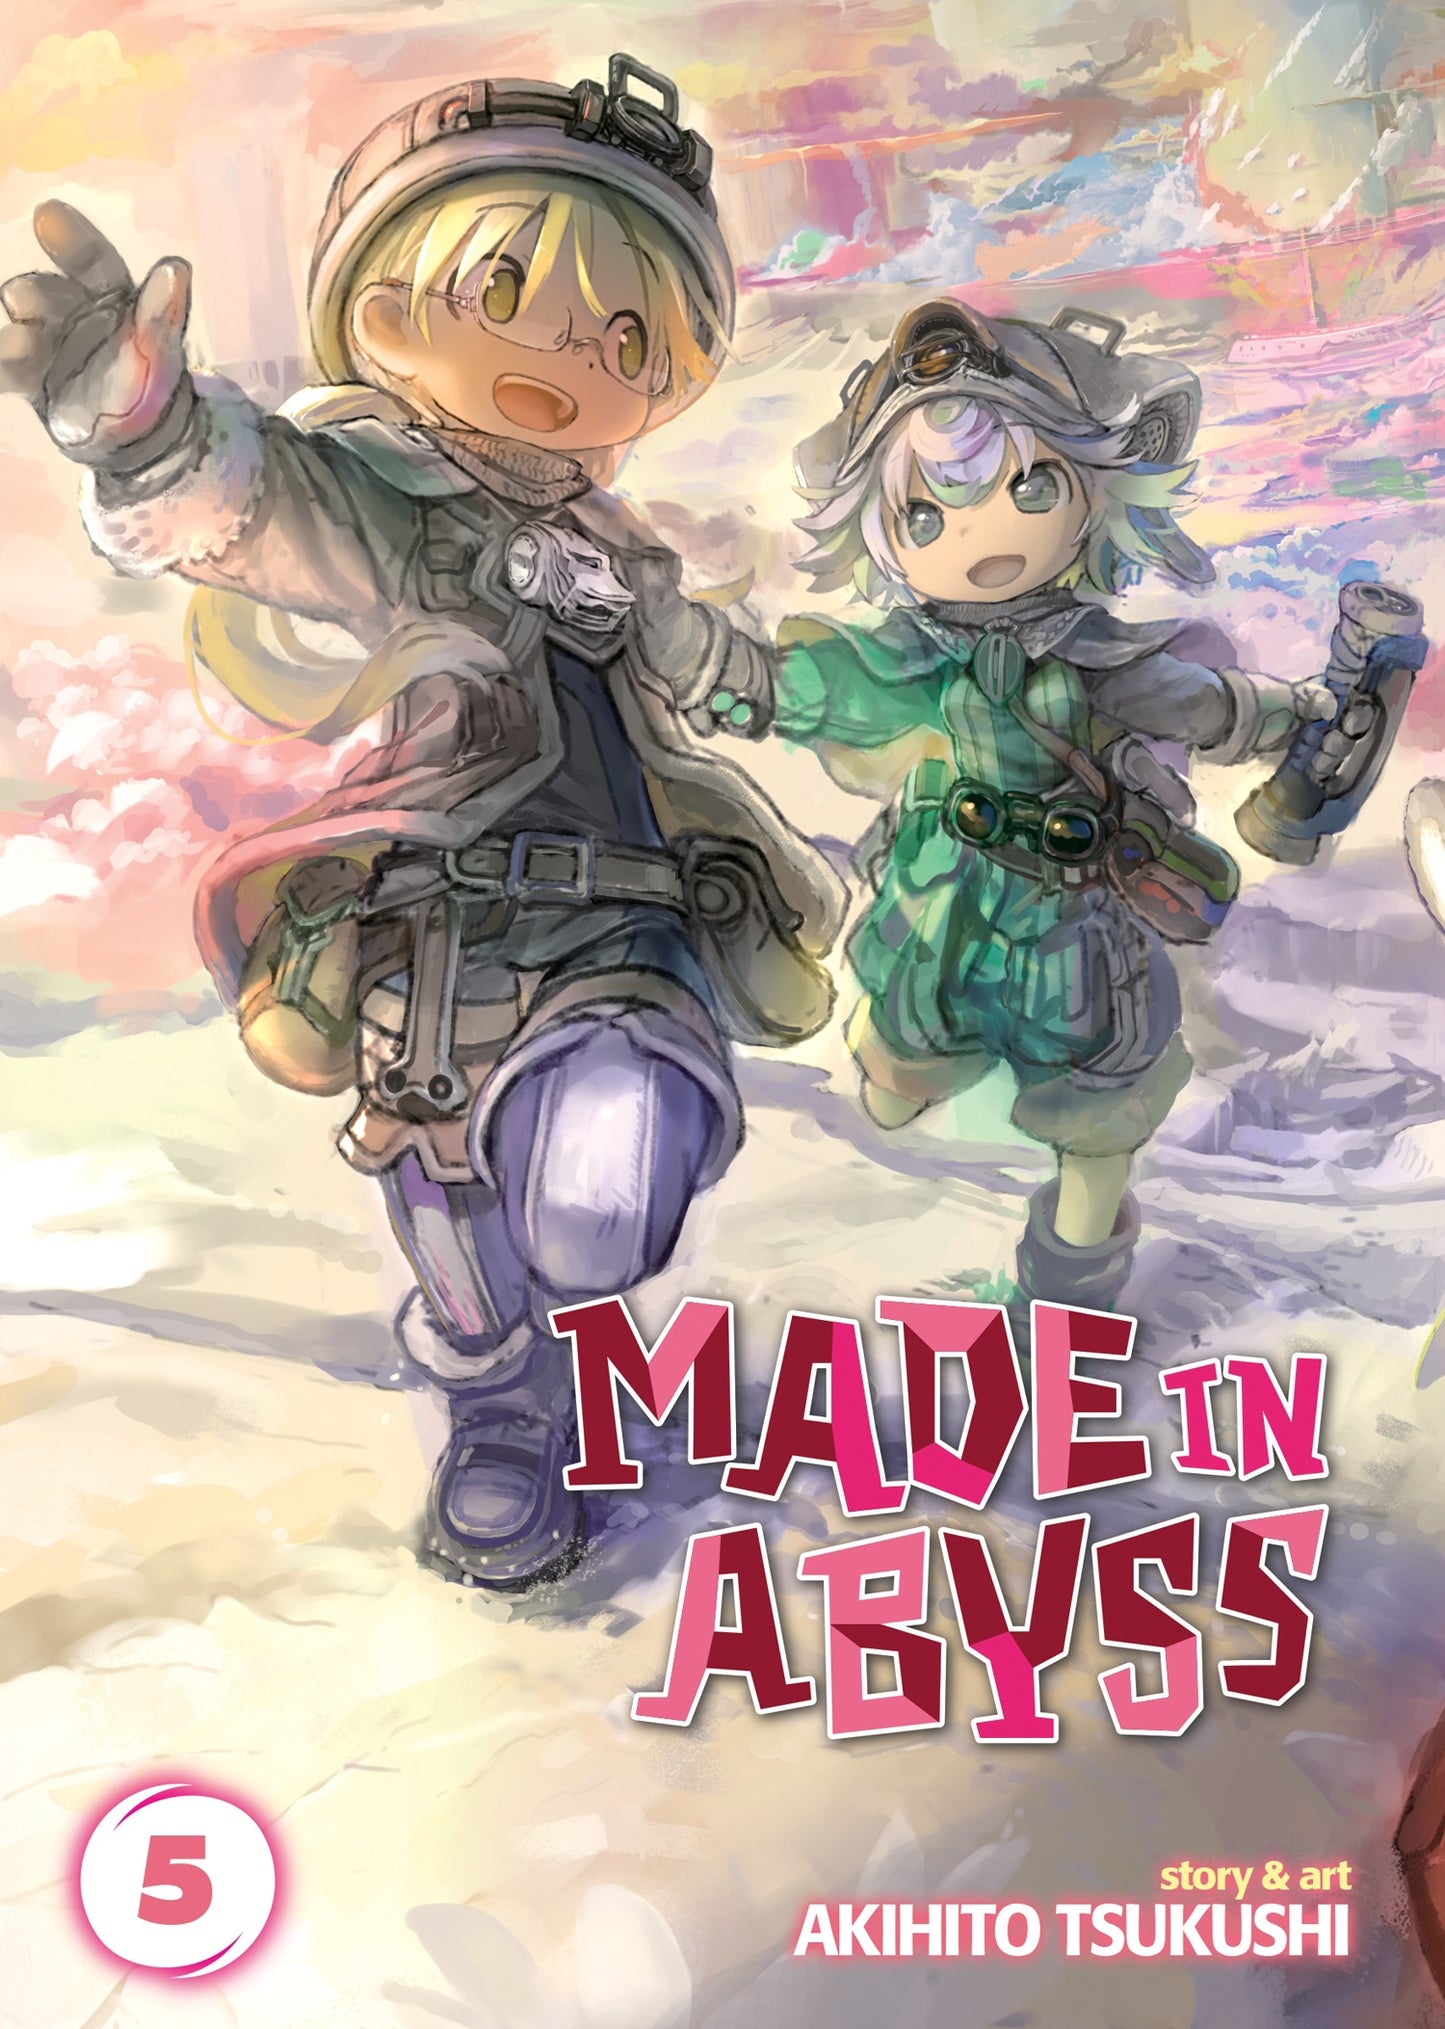 Made in Abyss Vol. 5 - Manga Warehouse